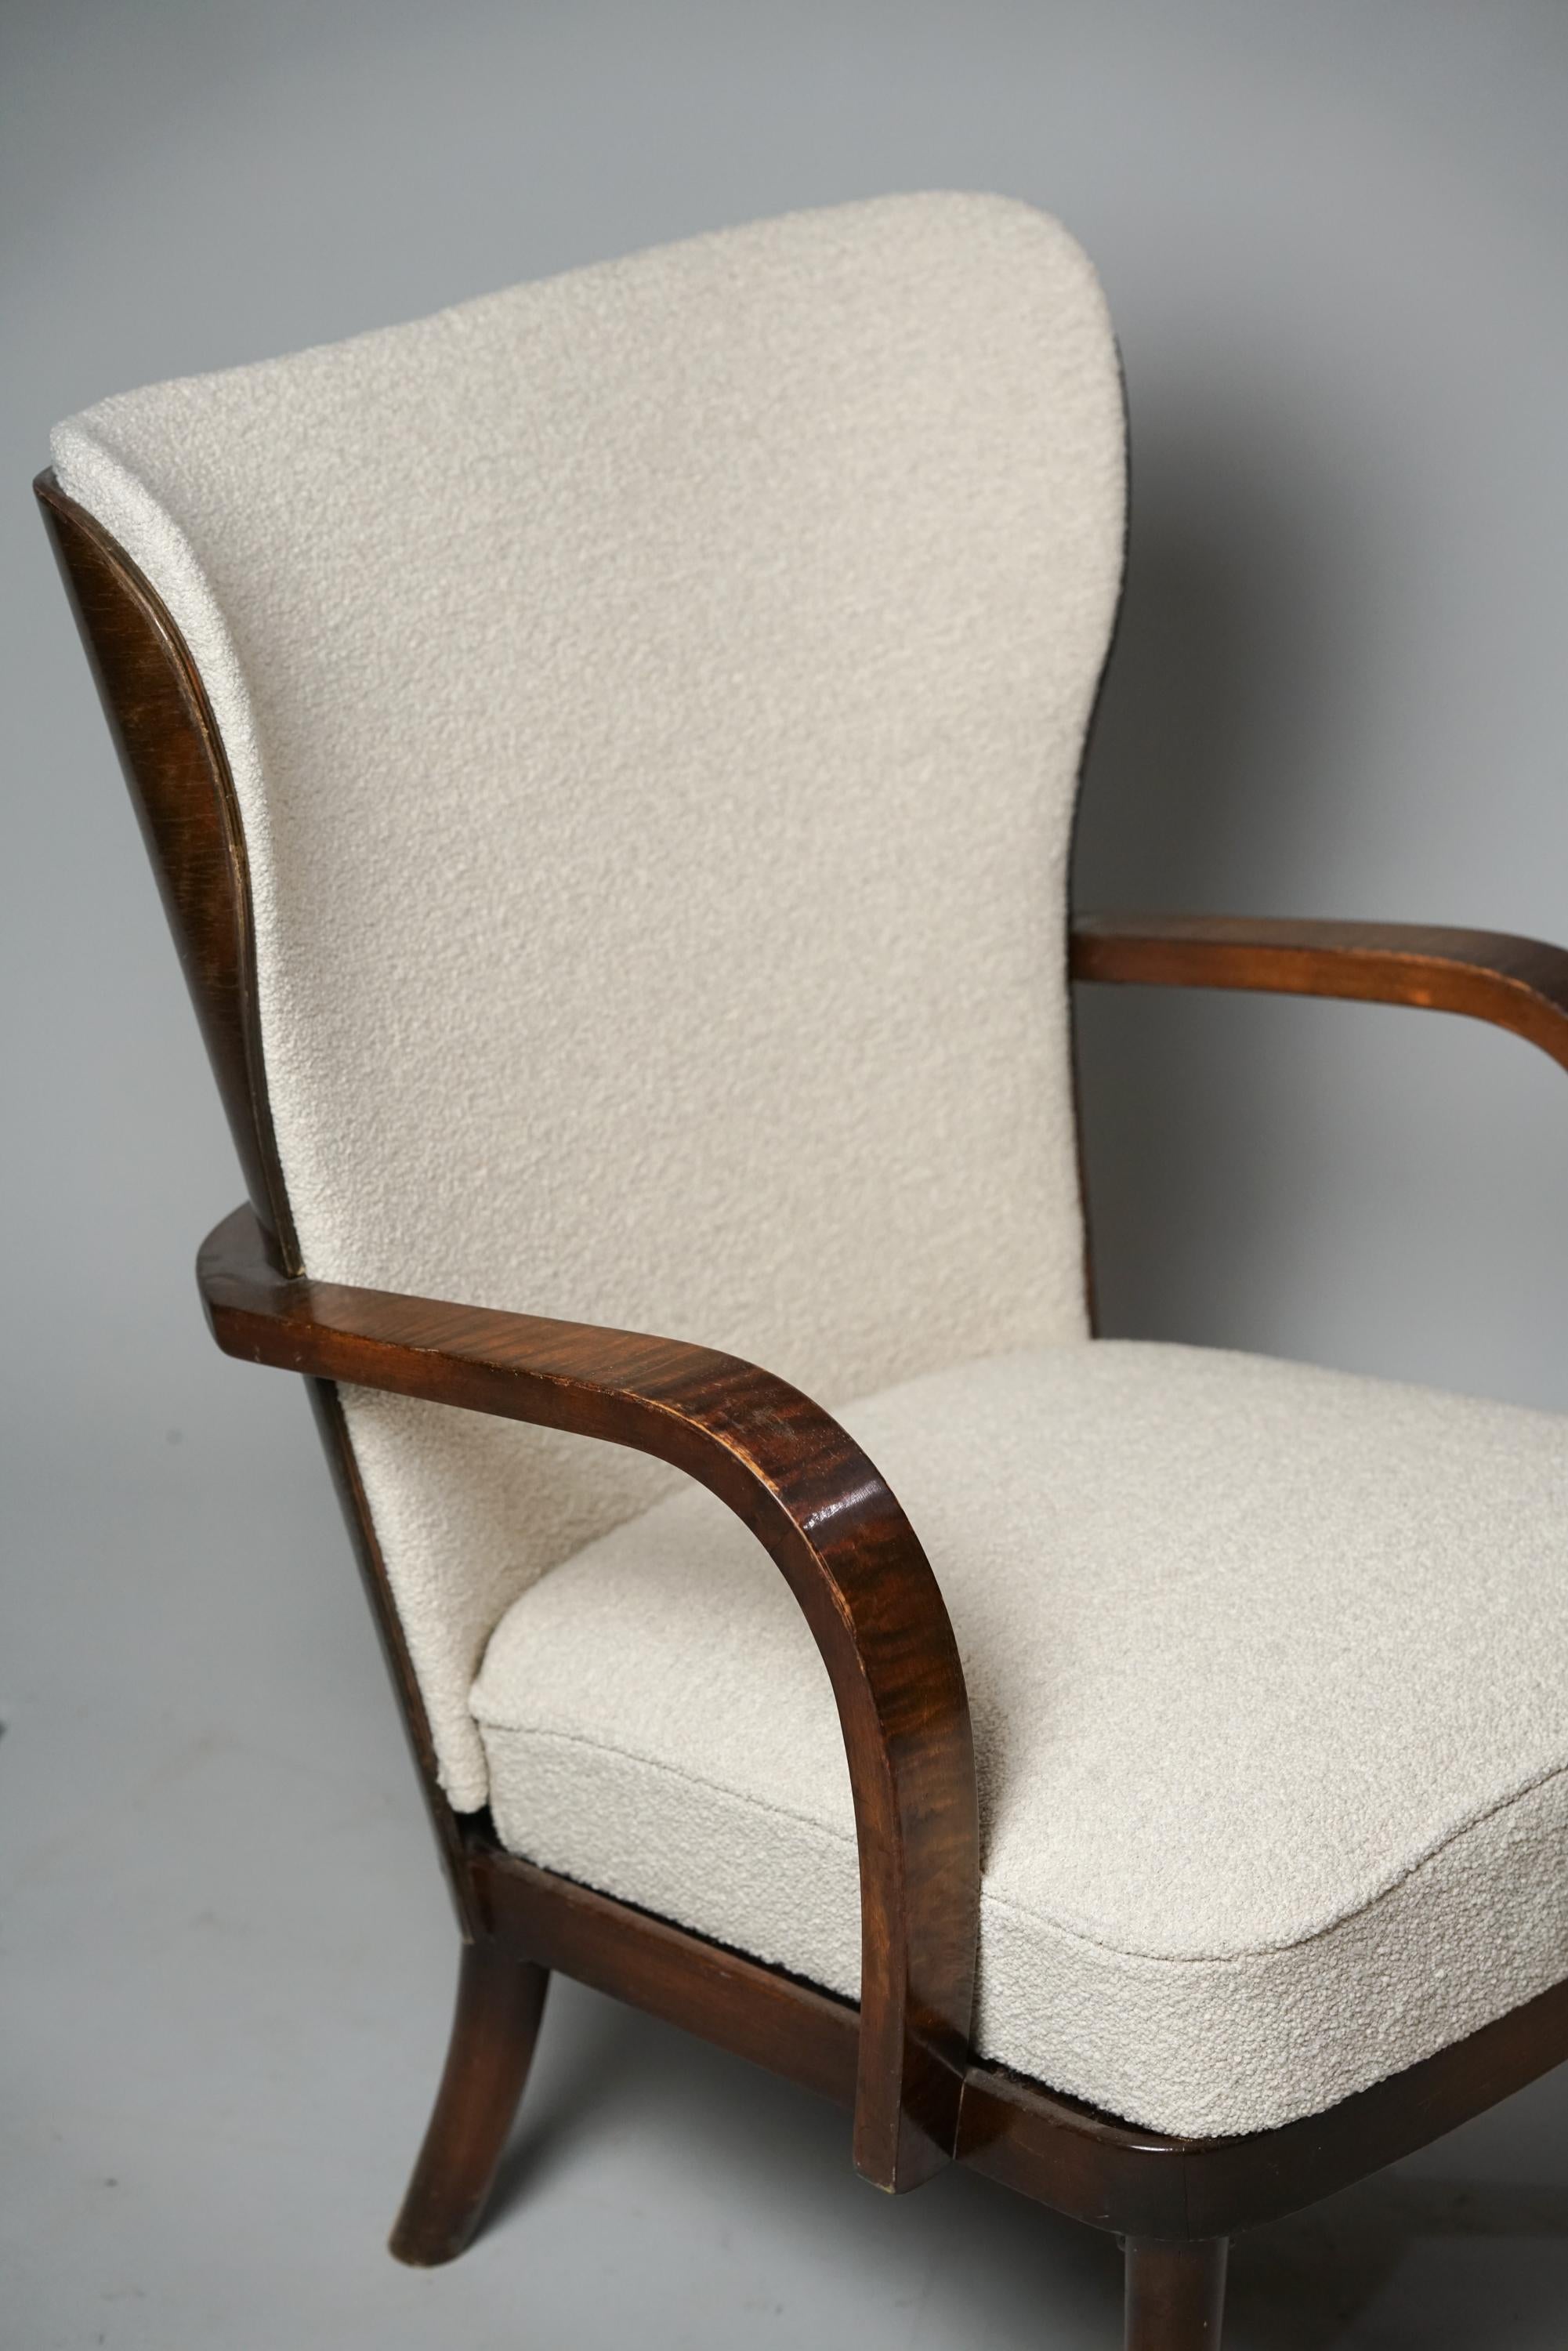 Wingback chair, designed by Werner West, manufactured by Wilhelm Schauman, 1930s. Stained birch frame, reupholstered with quality Lauritzon's Orsetto 012- fabric. Good vintage condition, minor patina consistent with age and use. Gorgeous